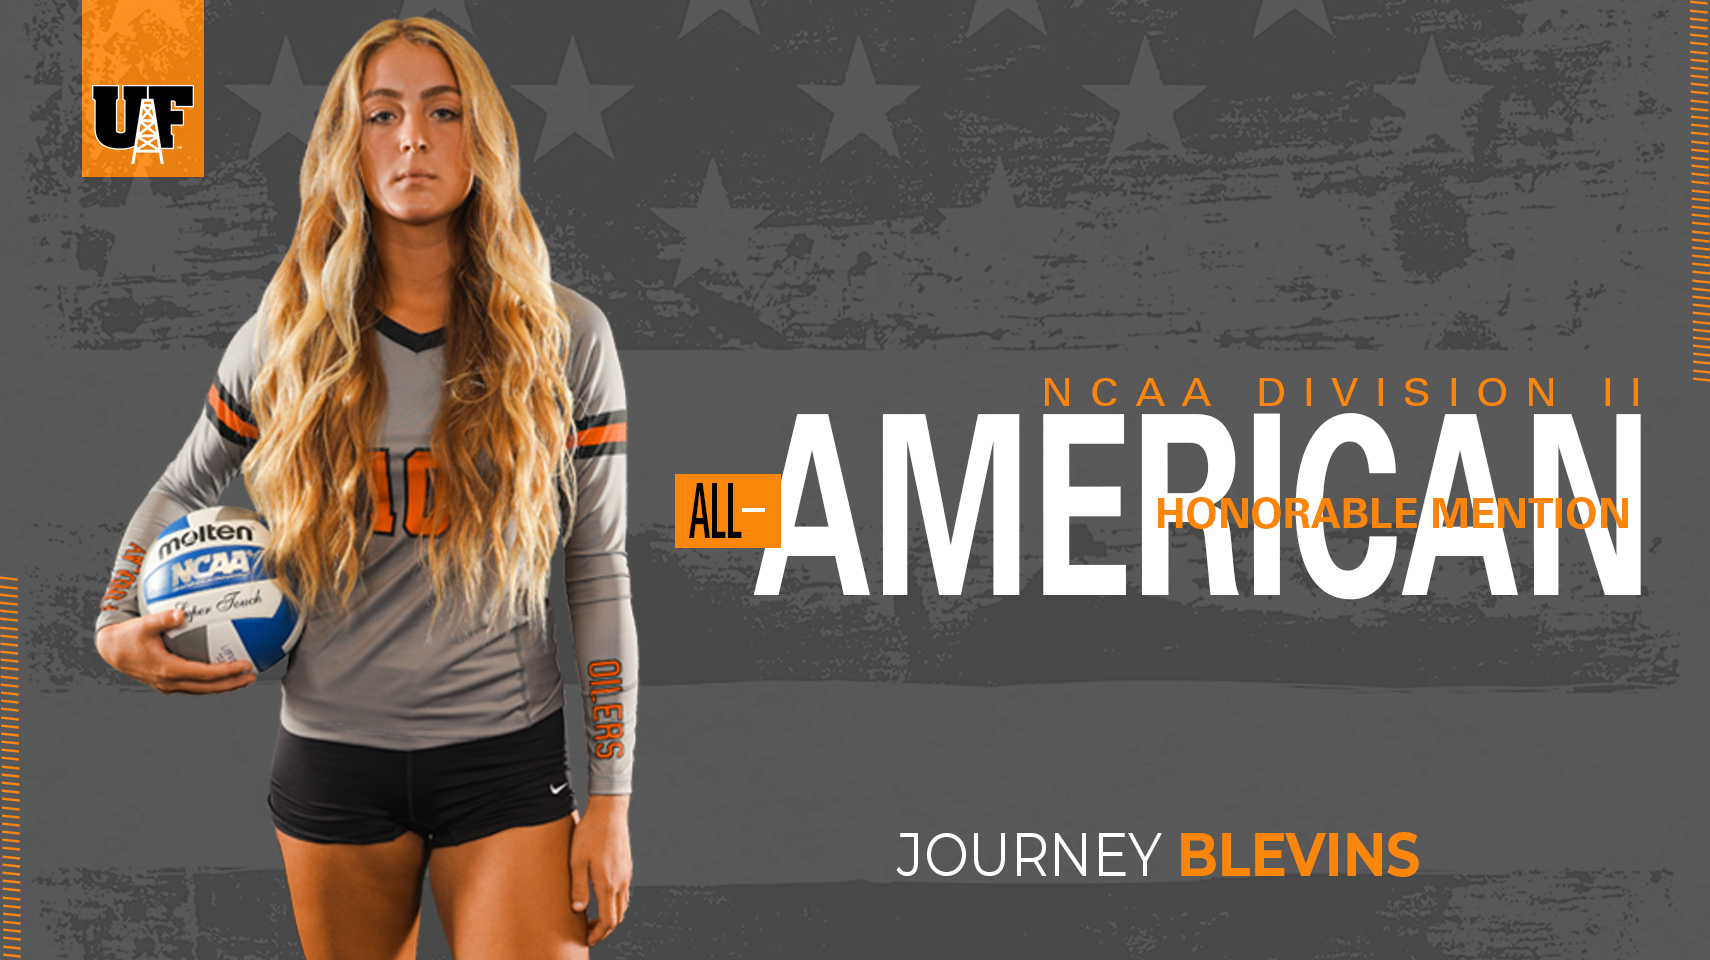 Journey Blevins on grey image as an all-American